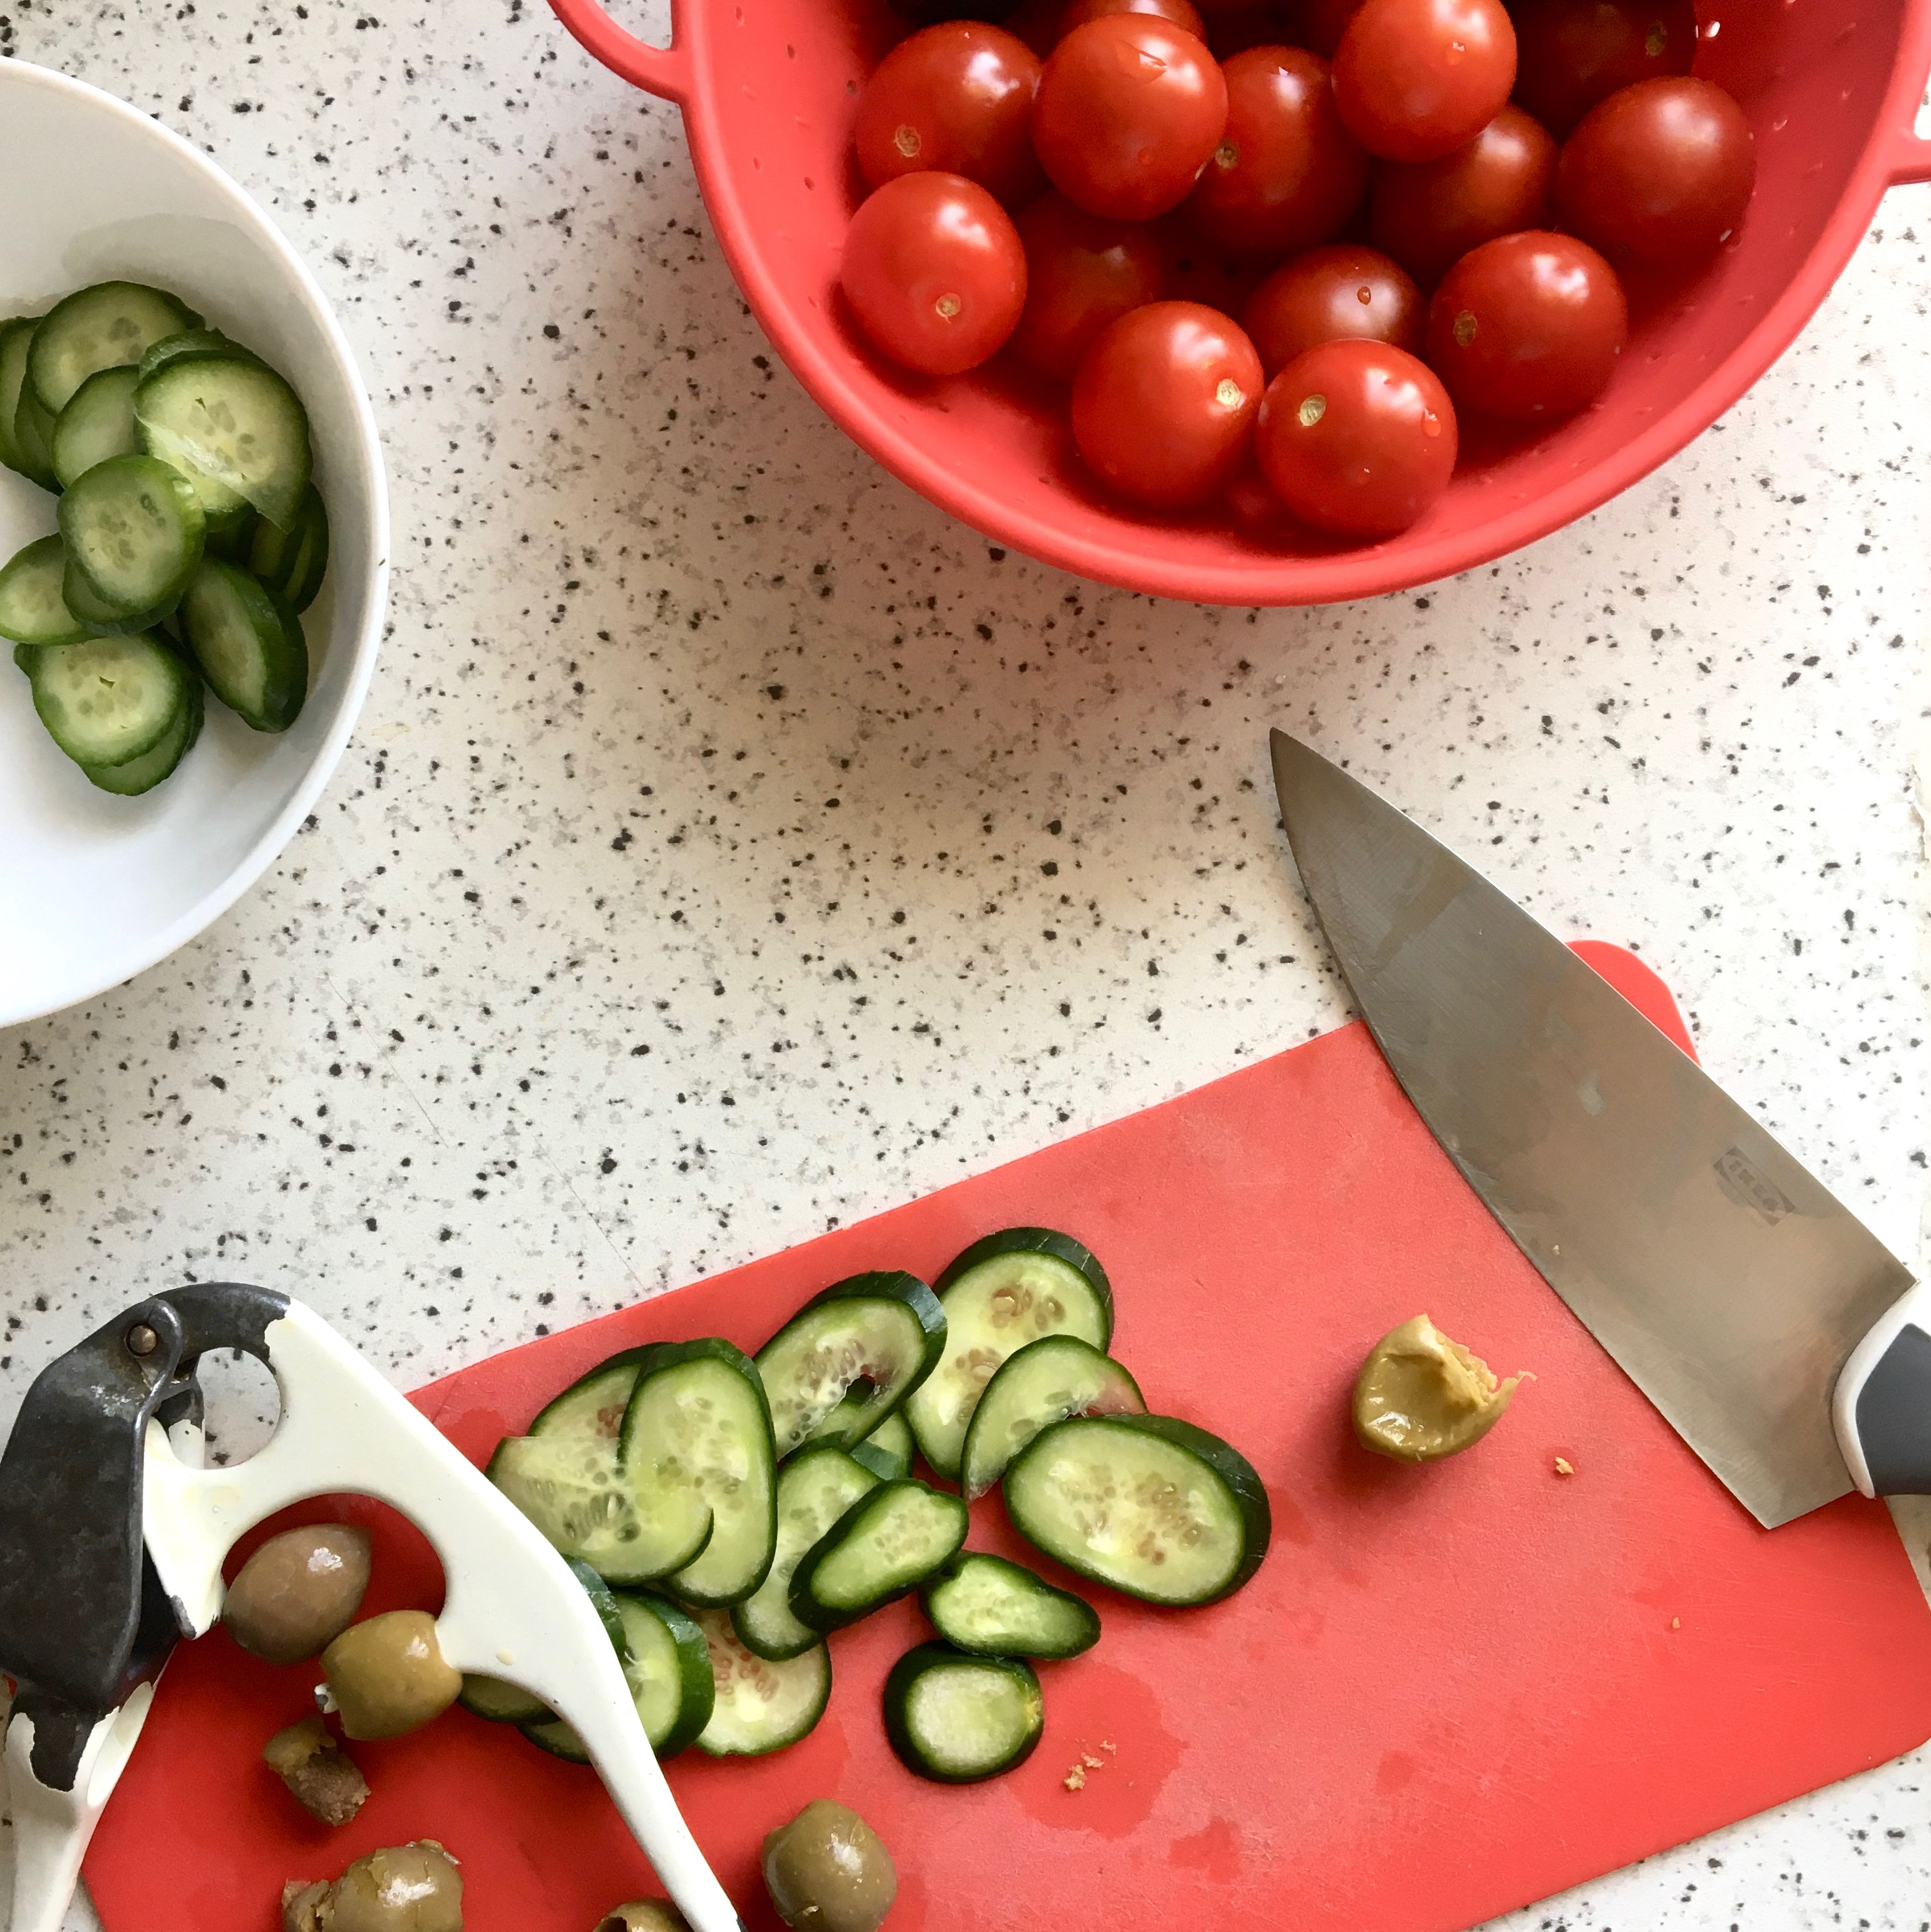 To prepare the topping, finely slice olives, onion, tomatoes and cucumbers. When the dough has risen, carefully transfer it onto a floured work surface and fold it from its four sides, just once from each side. Divide in two and cover again with damp cloth for their second rise, about 45 min. Lightly grease two baking sheets and set them aside. Heat the oven to 240 C.